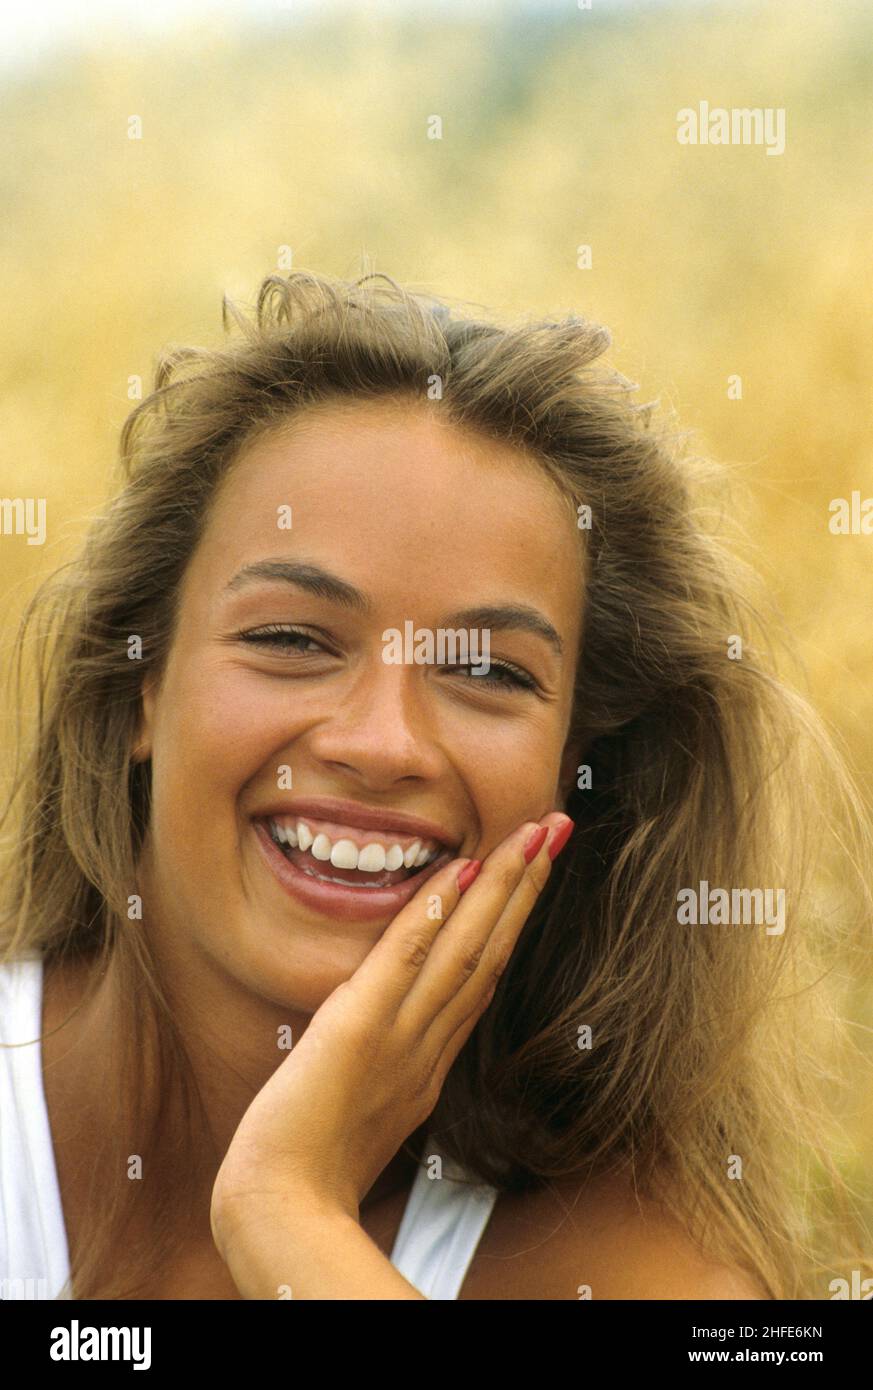 smiling and happy blond hair young woman portrait looking front camera yellow herbs background Stock Photo